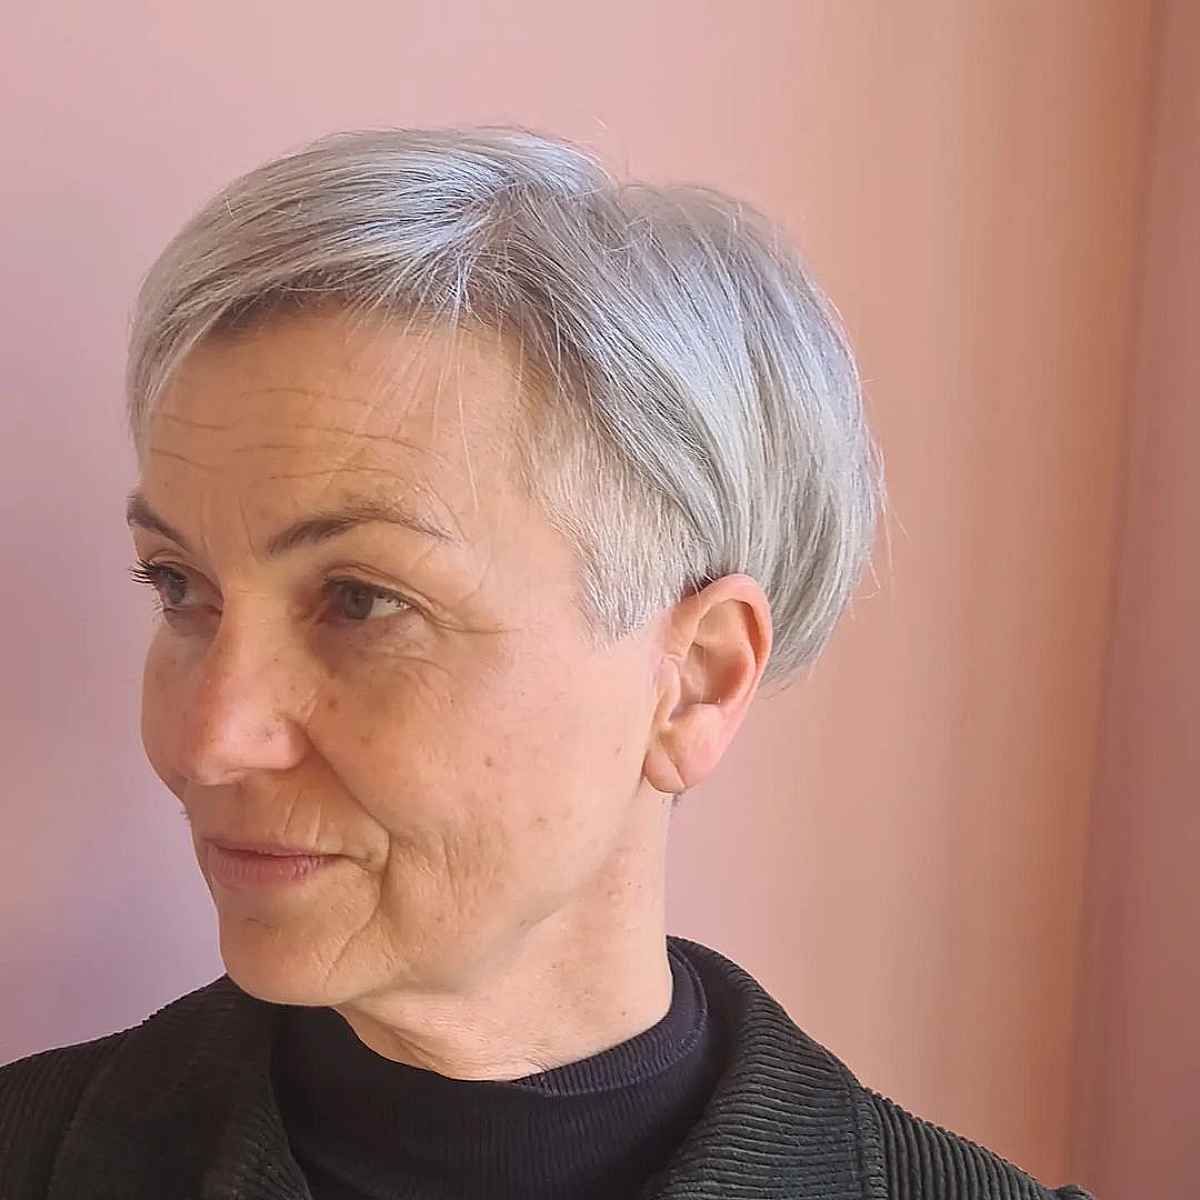 Shaved Side on Pixie Hair for Women in Their 60s